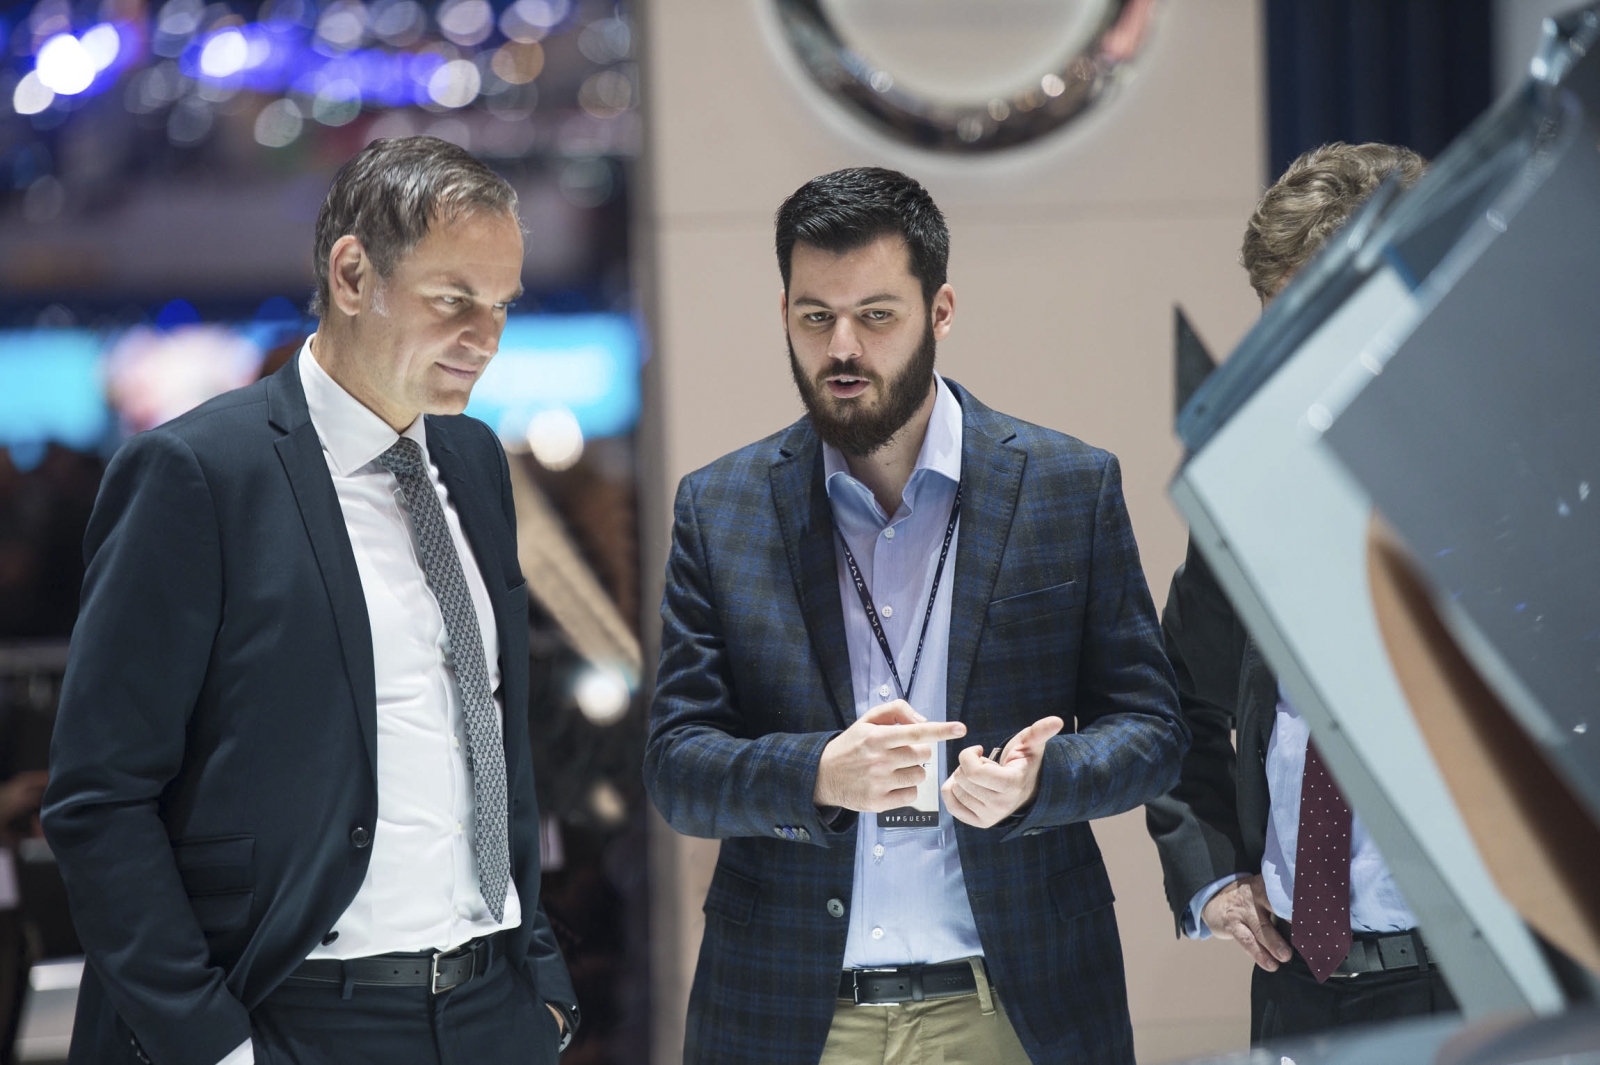 Oliver Blume, CEO of Porsche AG and Mate Rimac, Founder and CEO of Rimac Automobili, Courtesy of The Autofocus